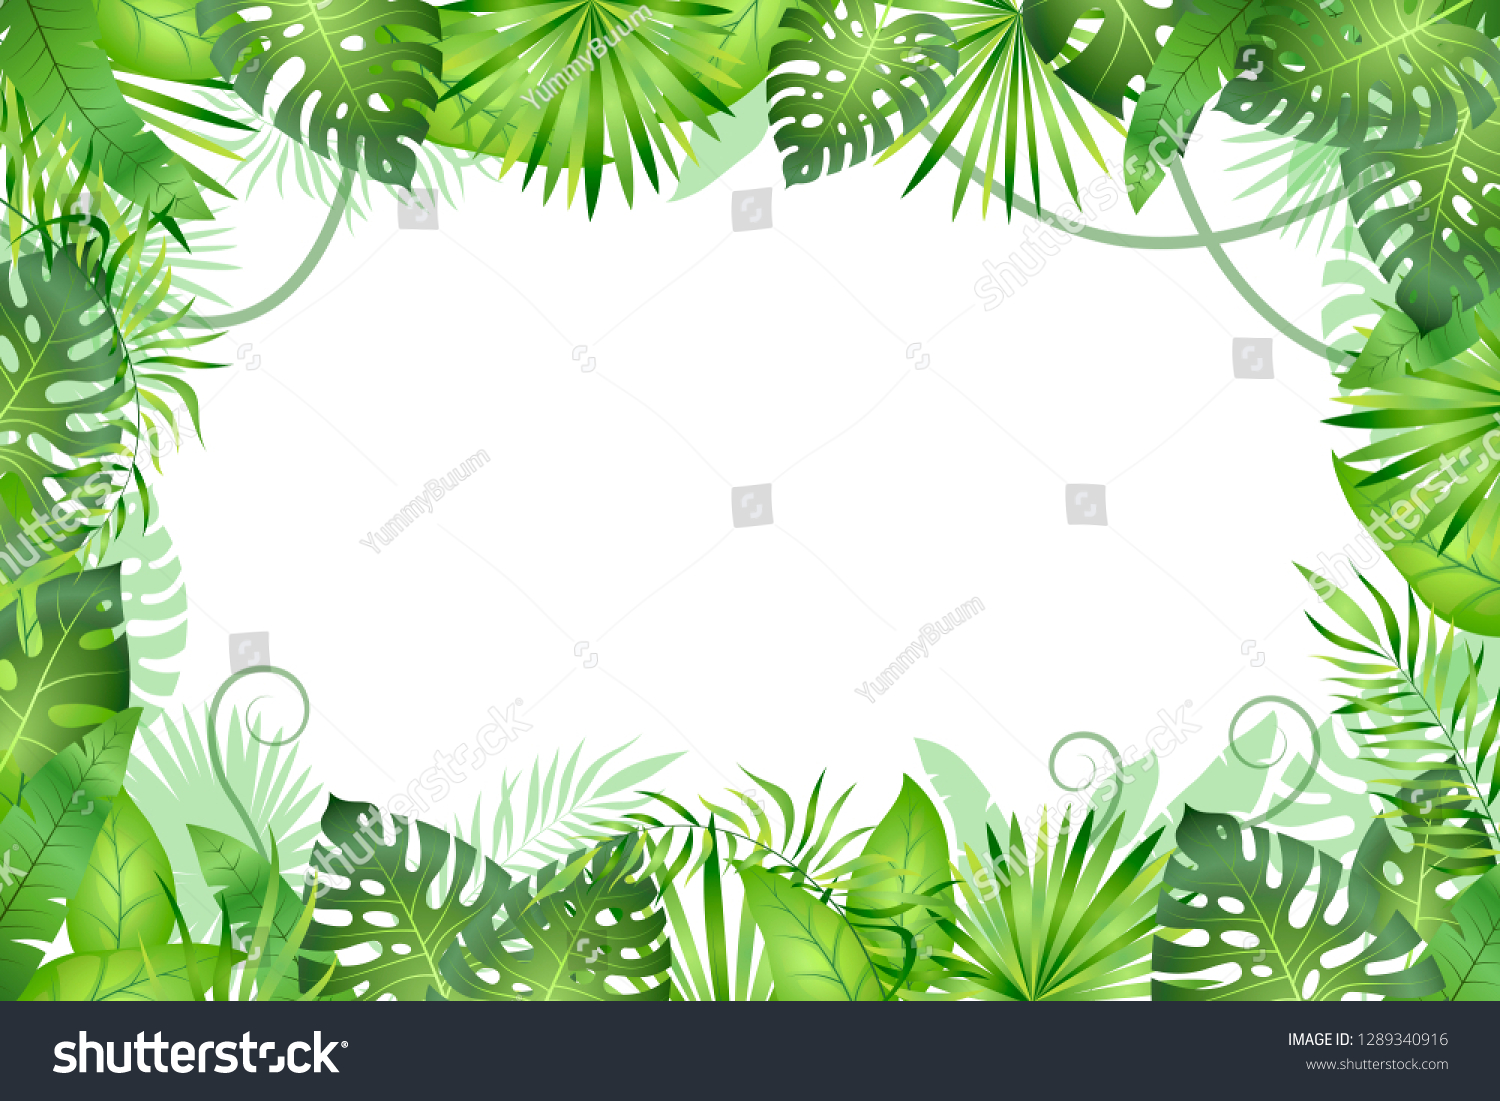 Jungle background. Tropical leaves frame. Rainforest foliage plants, green grass trees. Paradise african wildlife jungle vector frame #1289340916